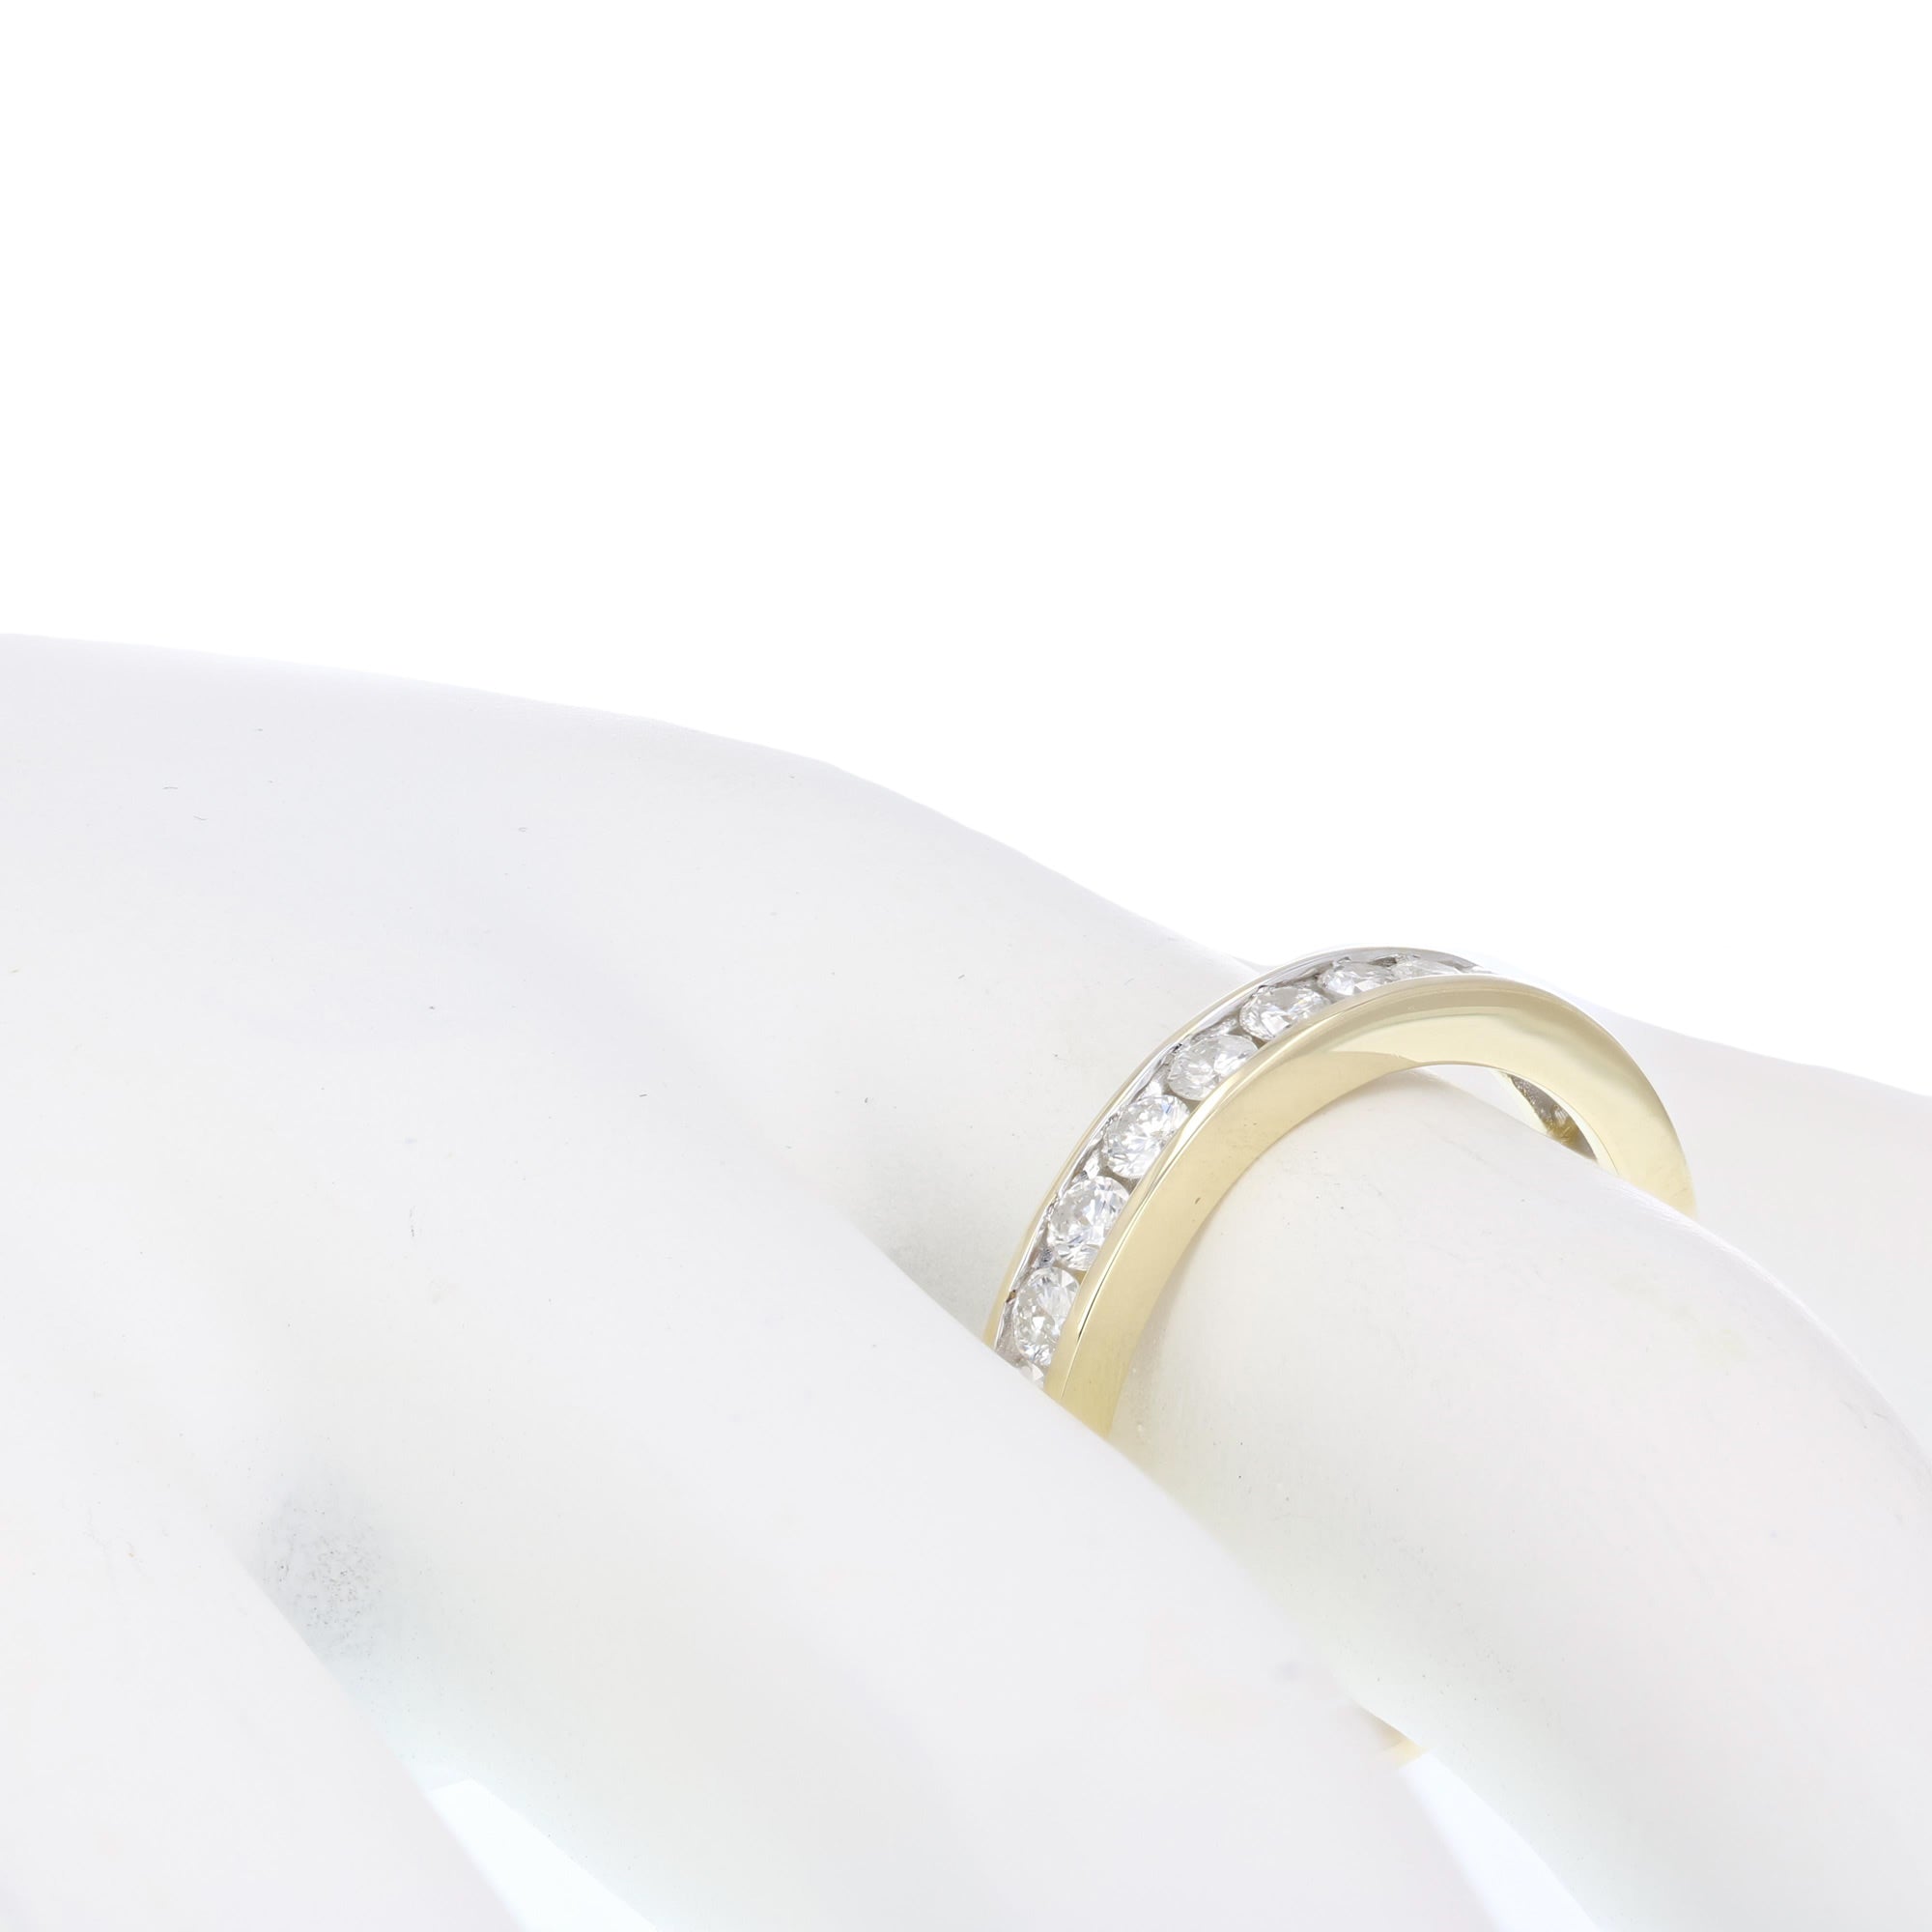 1/2 cttw Diamond Wedding Band For Women, Classic Diamond Wedding Band in 14K Yellow Gold Channel Set, Size 4.5-10